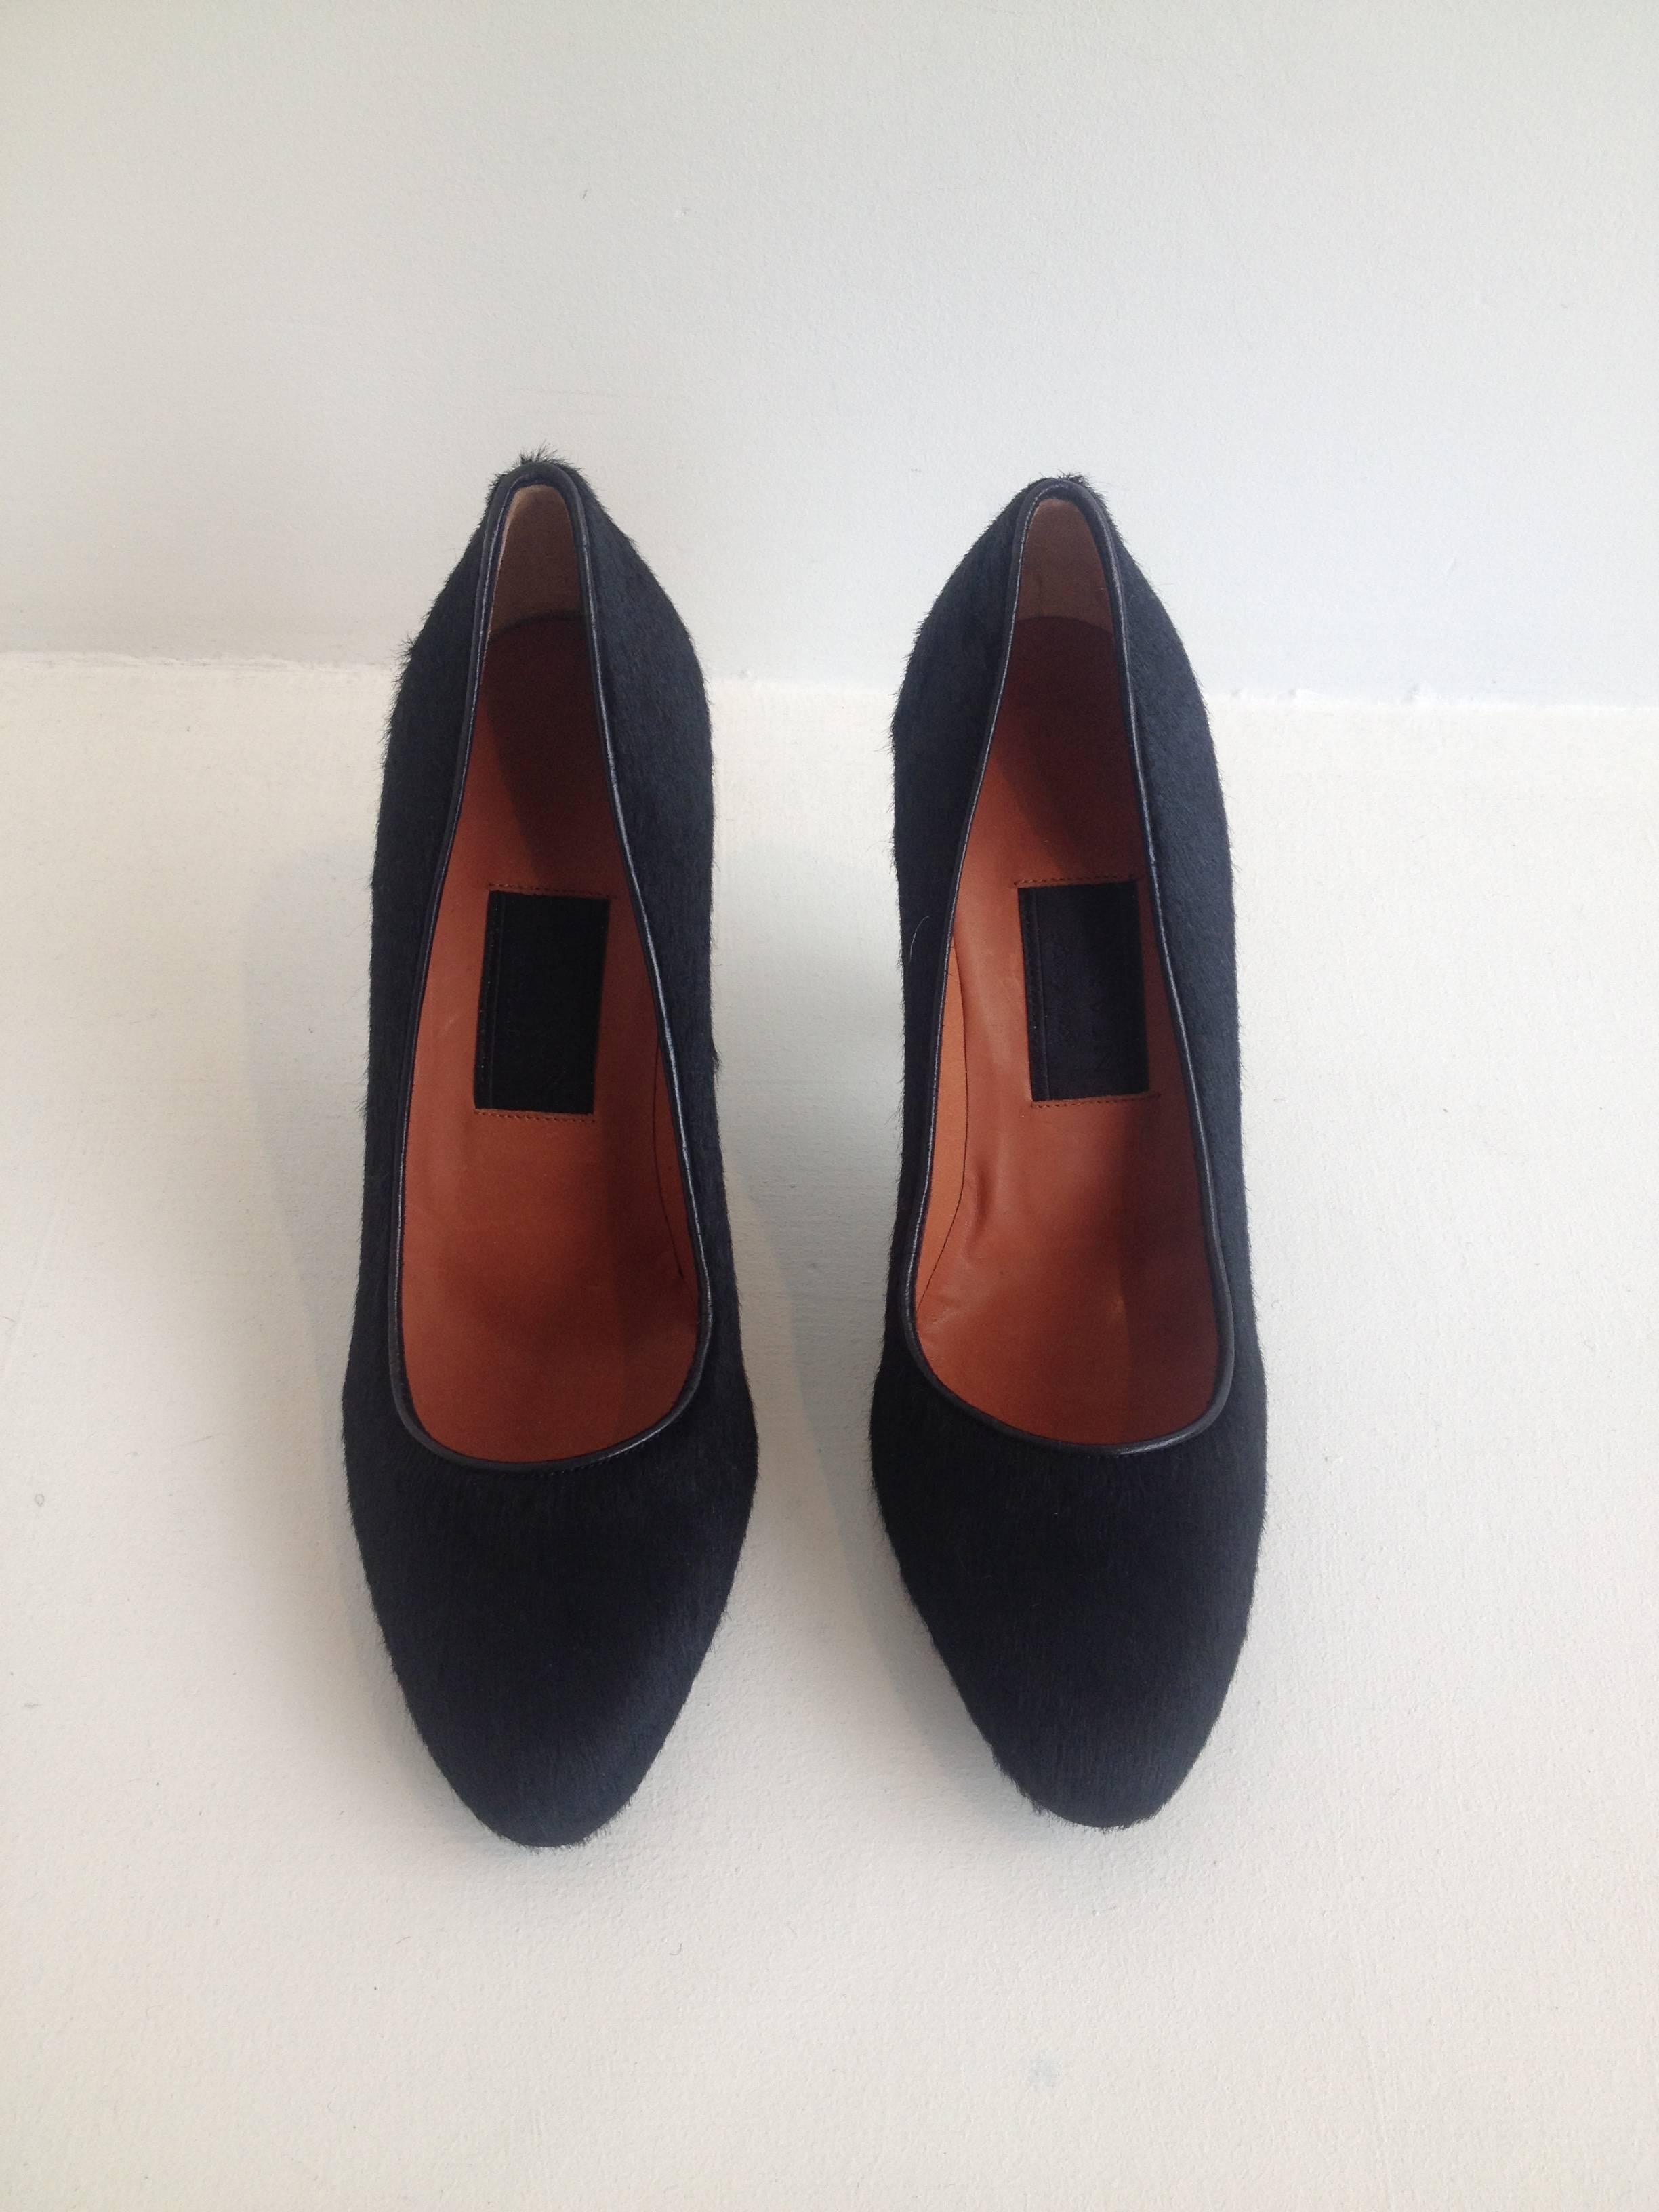 These wonderful shoes are sculptural but very wearable at the same time. It is very intriguing the way Lanvin contrasts colors and textures justopposing the black ponyhair body to the shiny smooth navy 3.75 inch heel. This is a shoe that can be worn